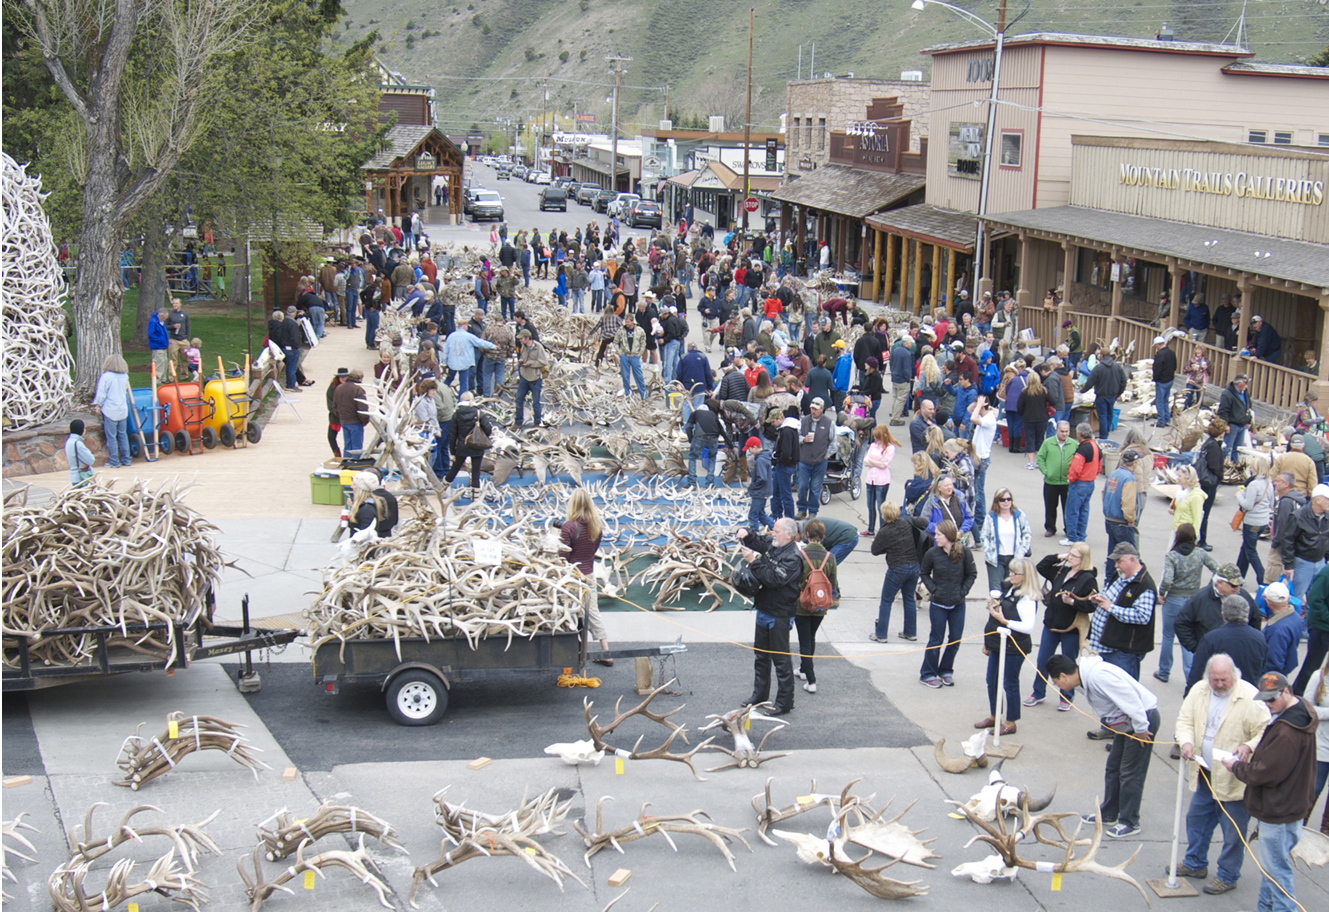 Jackson Hole Elkfest and Old West Days Events in May Bring Wyoming Wild